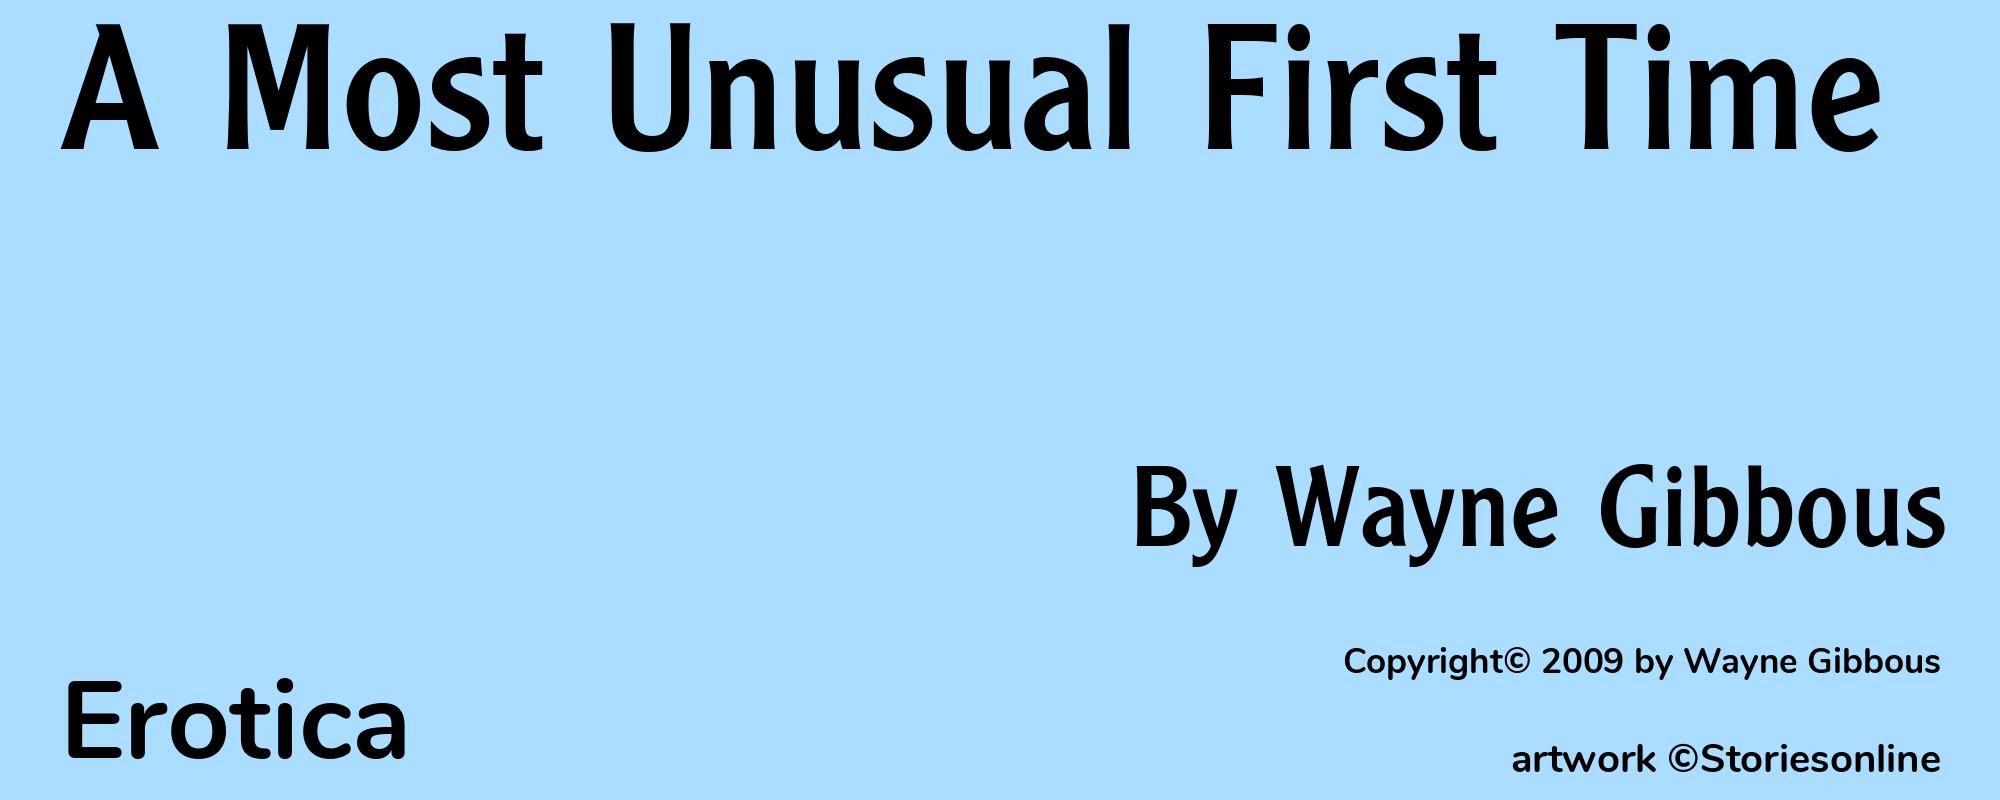 A Most Unusual First Time - Cover